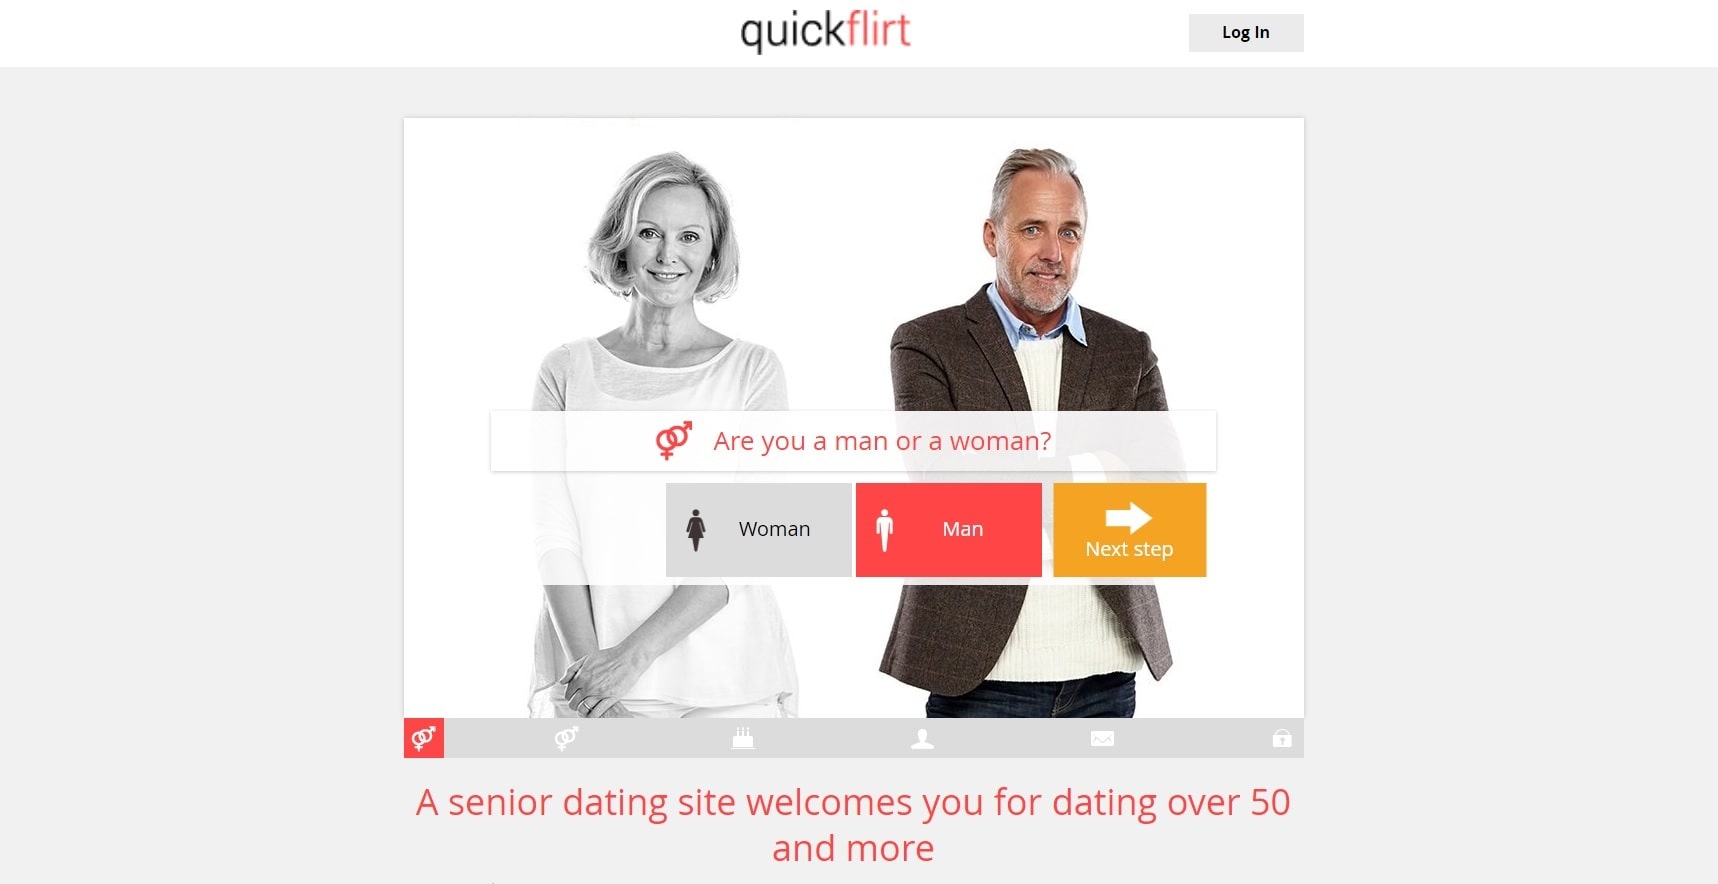 Over 50 dating sites in Minsk